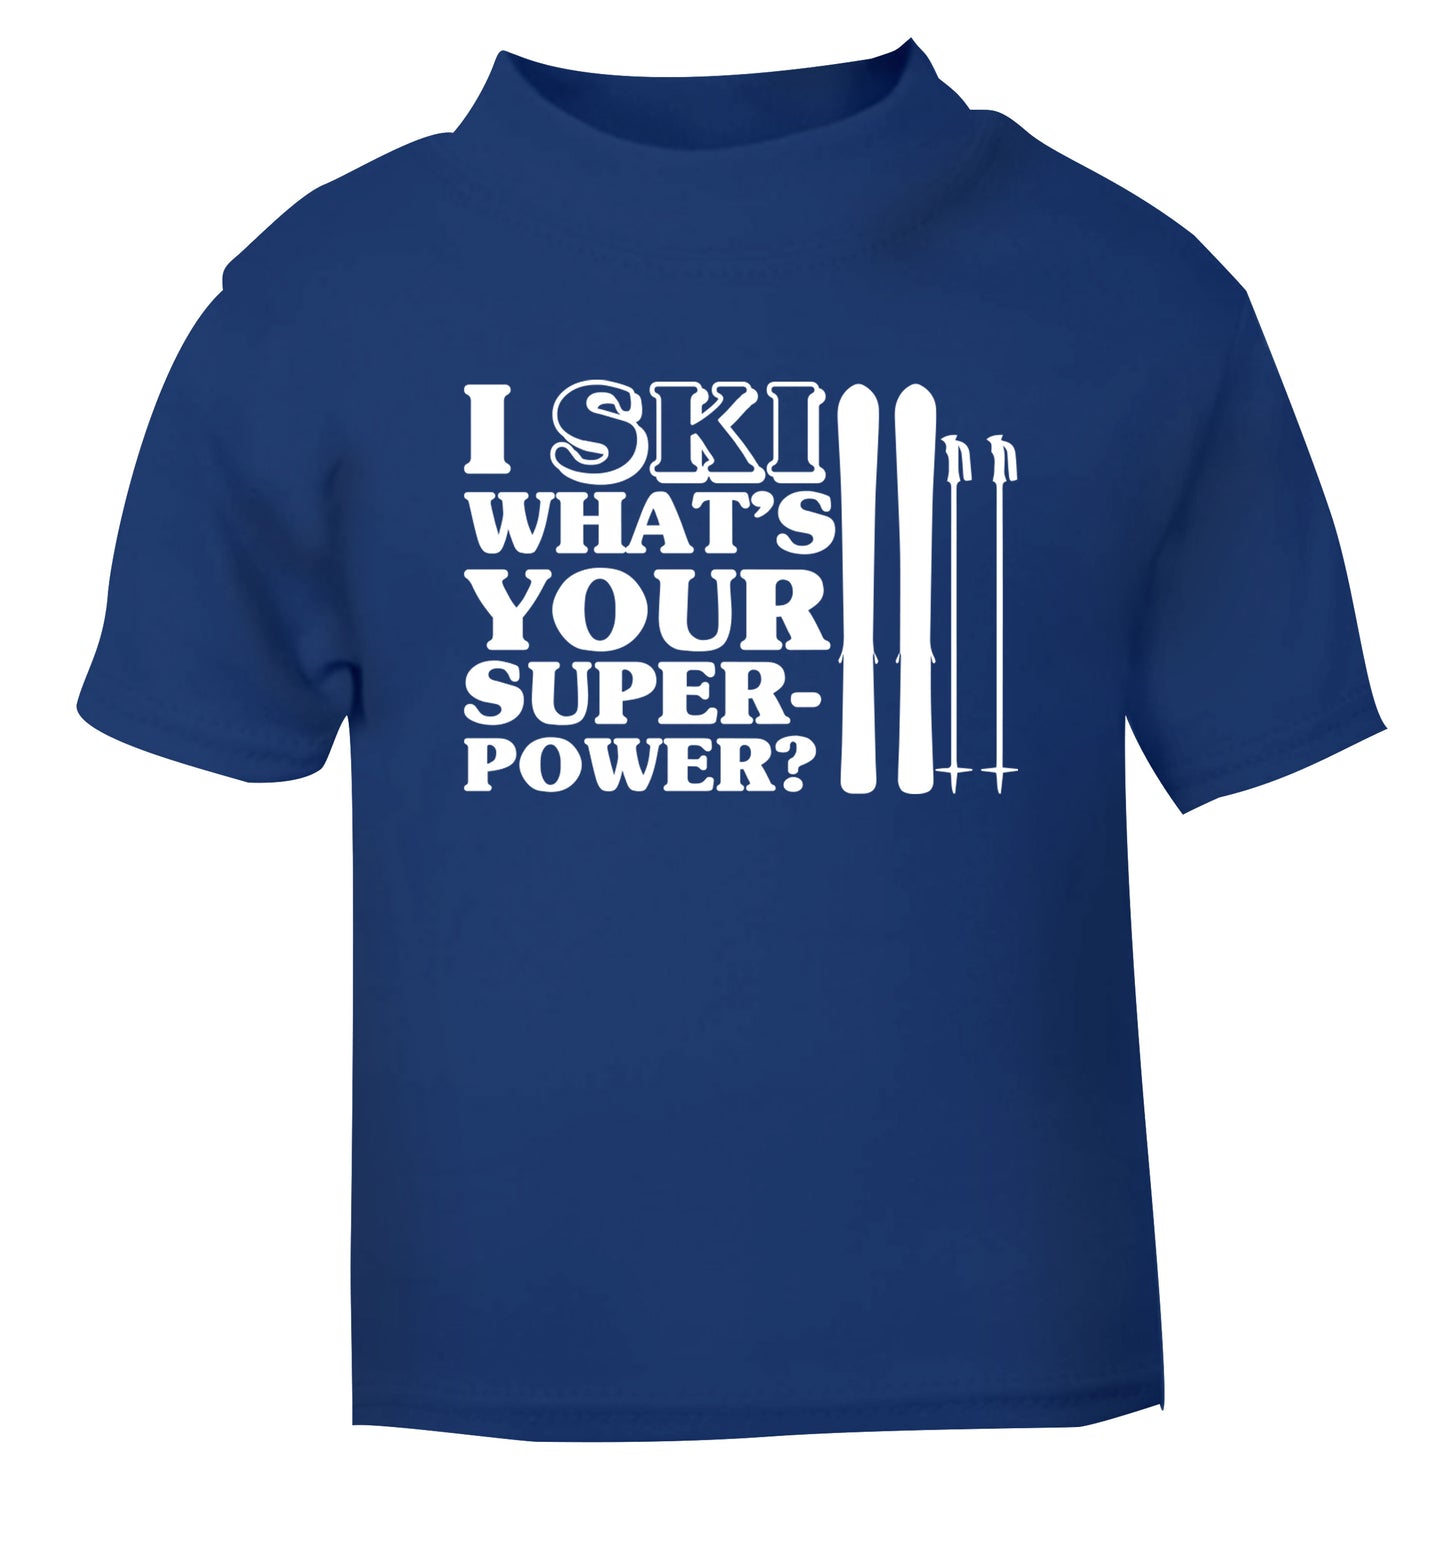 I ski what's your superpower? blue Baby Toddler Tshirt 2 Years